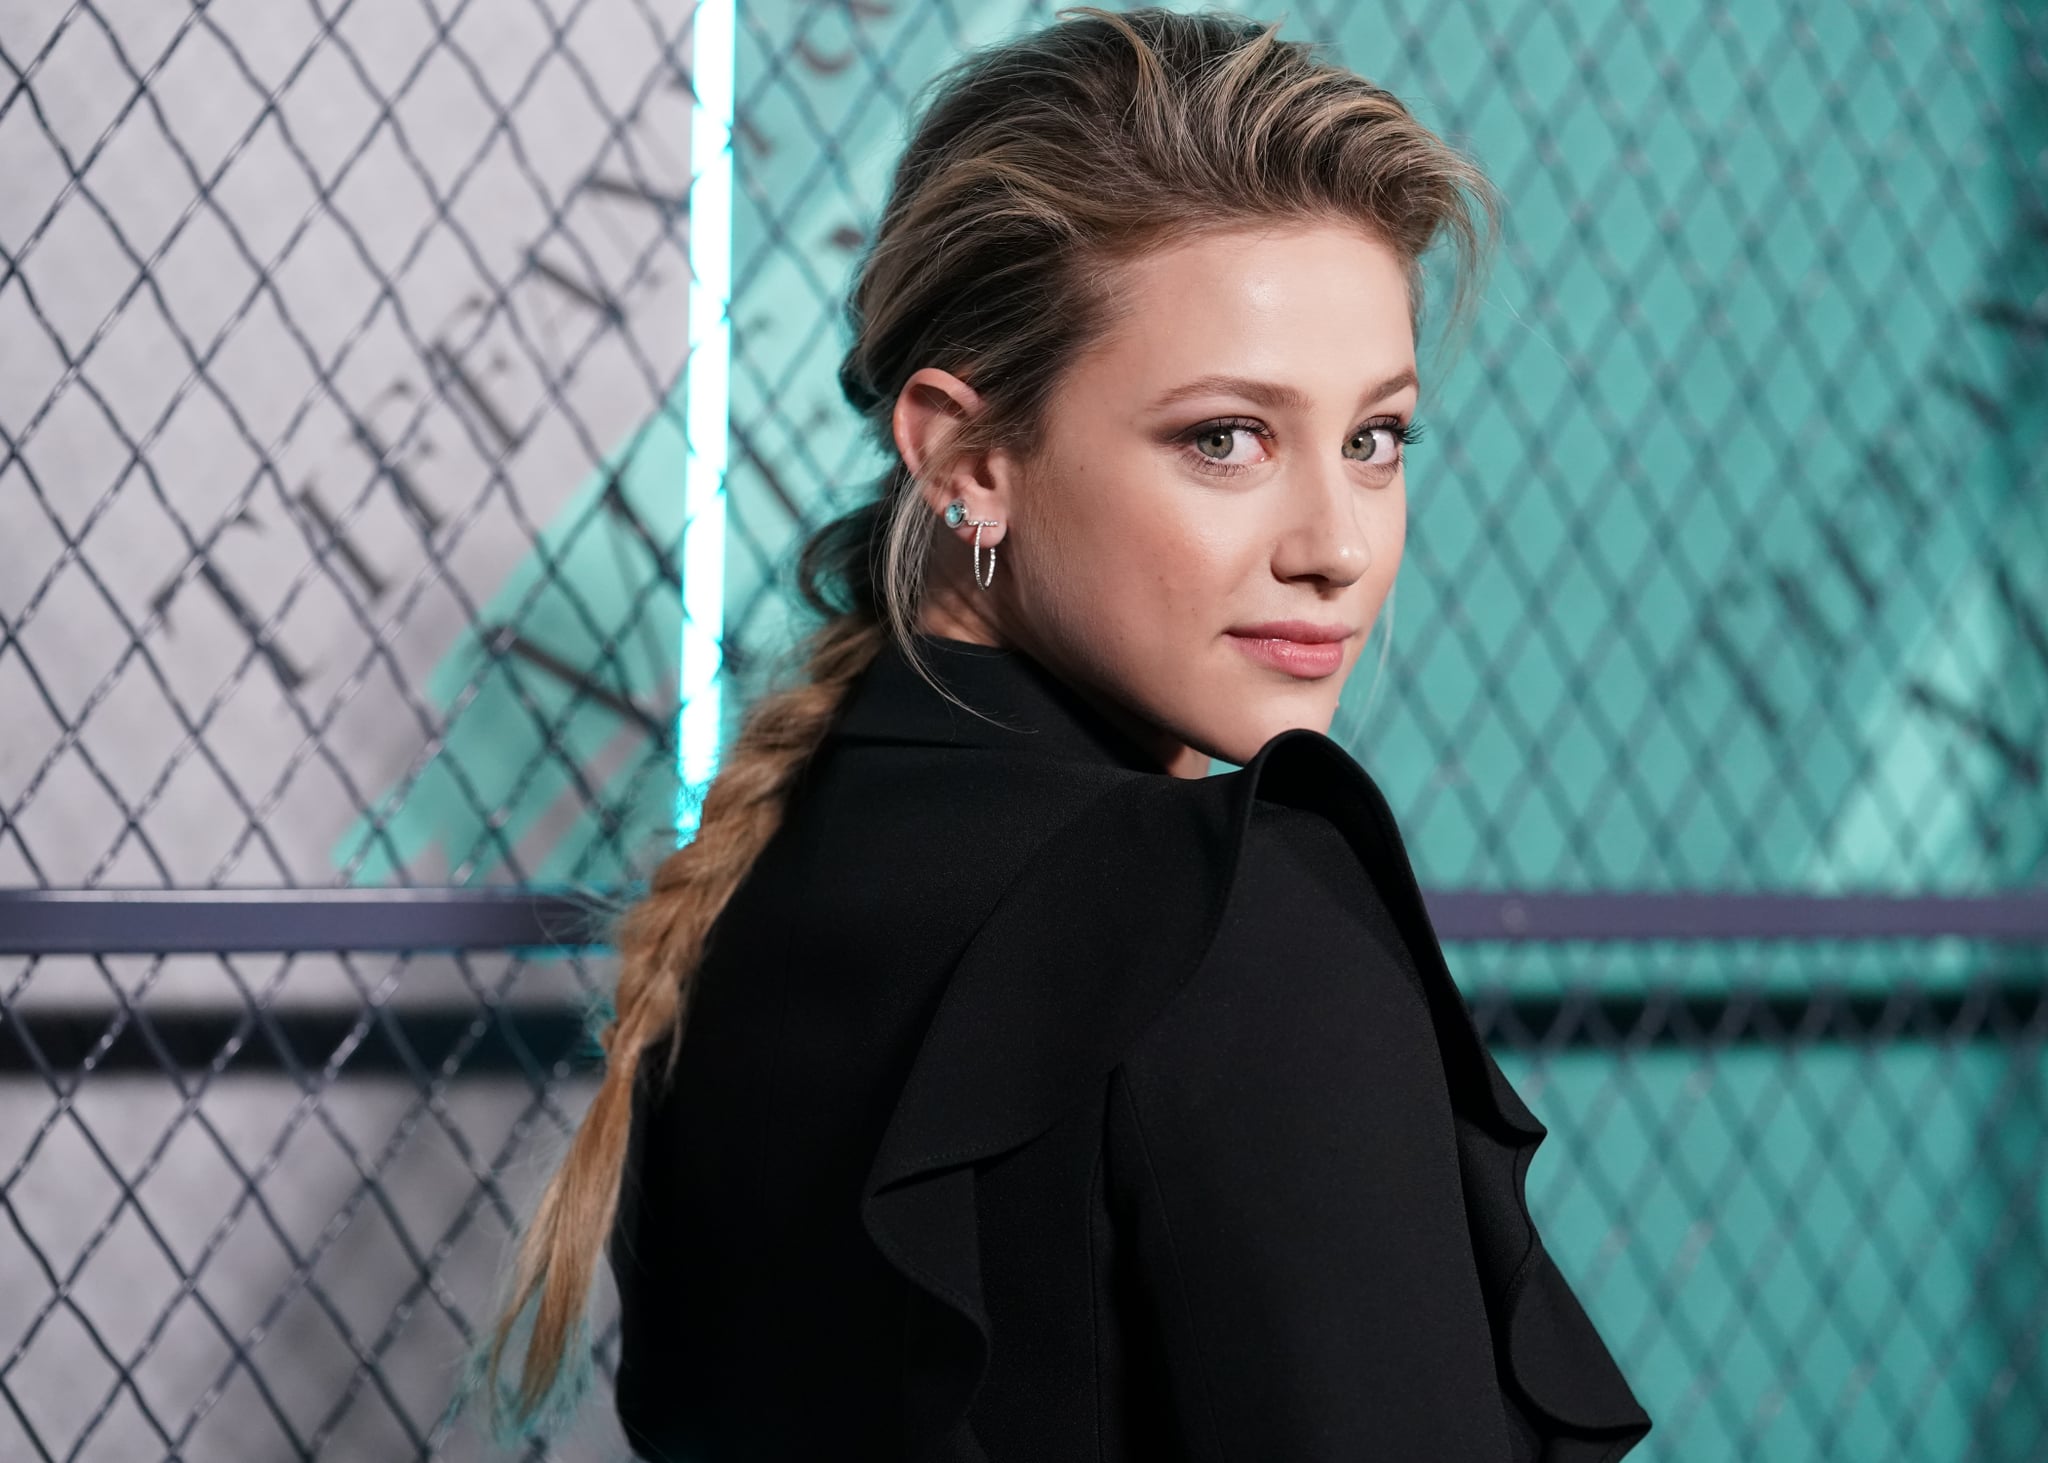 HOLLYWOOD, CALIFORNIA - OCTOBER 11: Lily Reinhart attends Tiffany & Co. launch of the new Tiffany Men's Collections at Hollywood Athletic Club on October 11, 2019 in Hollywood, California. (Photo by Rachel Luna/FilmMagic)